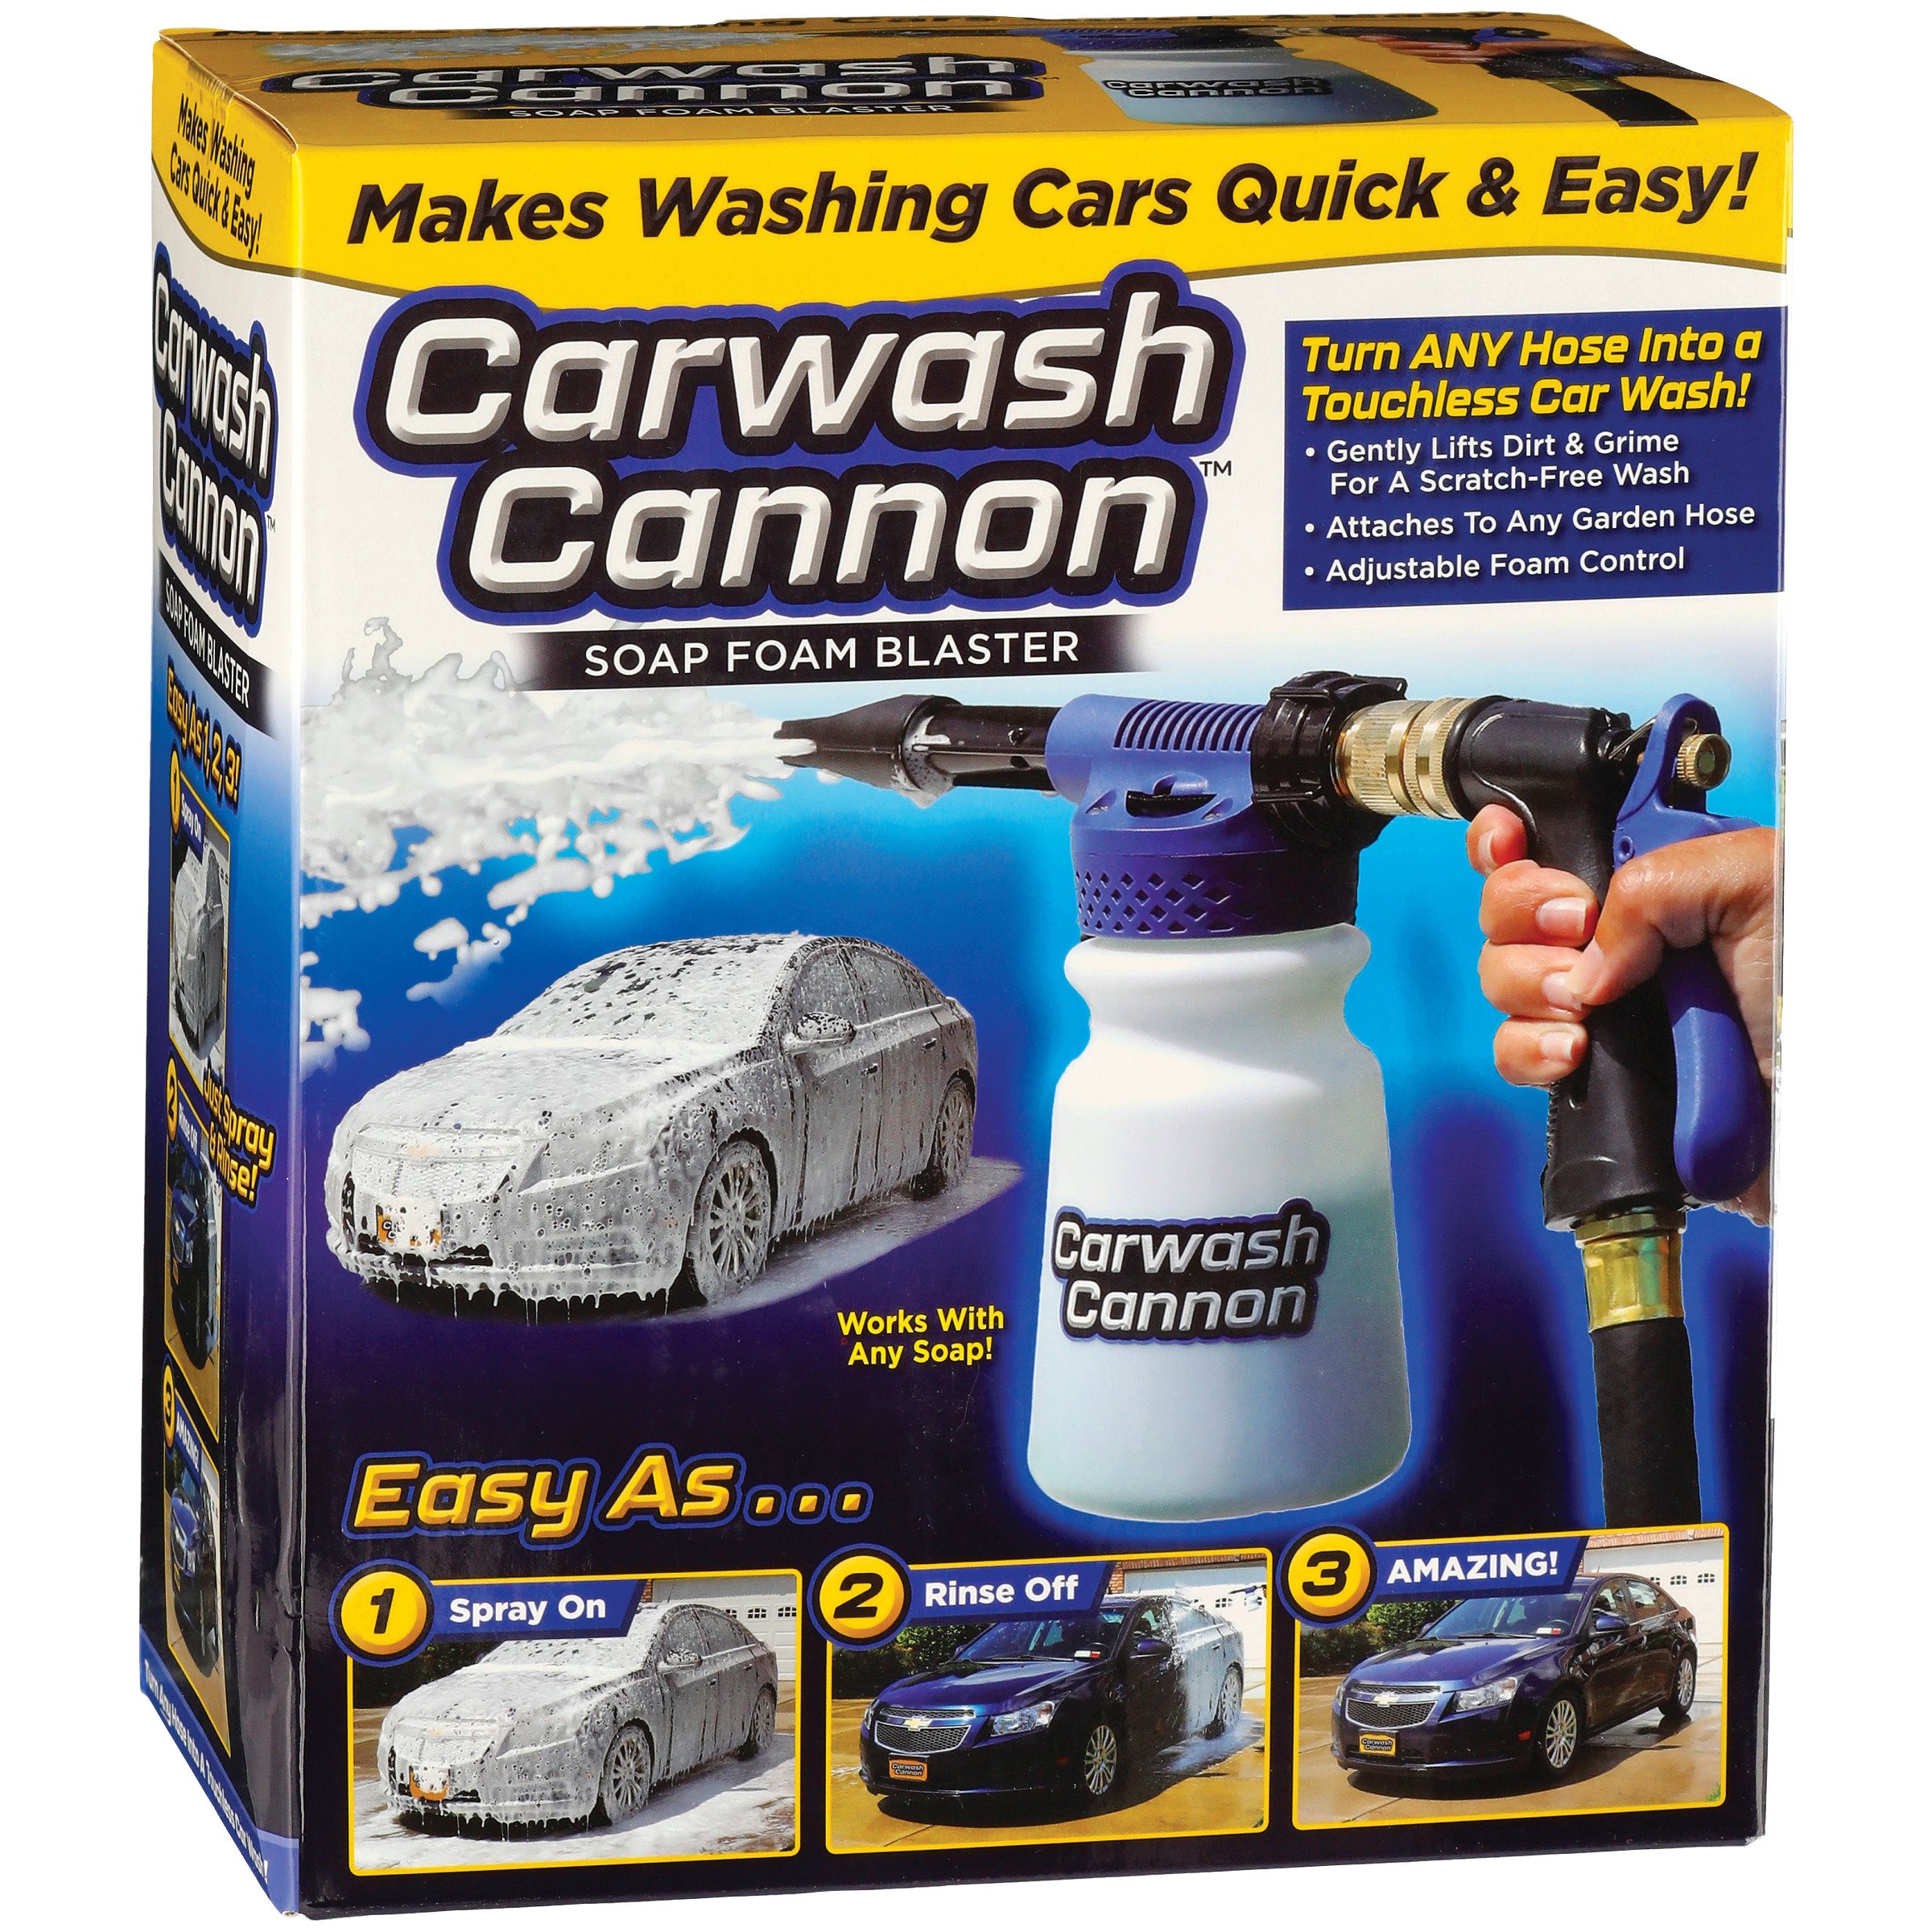 As Seen On TV Car Wash Cannon - Shop Car Accessories at H-E-B